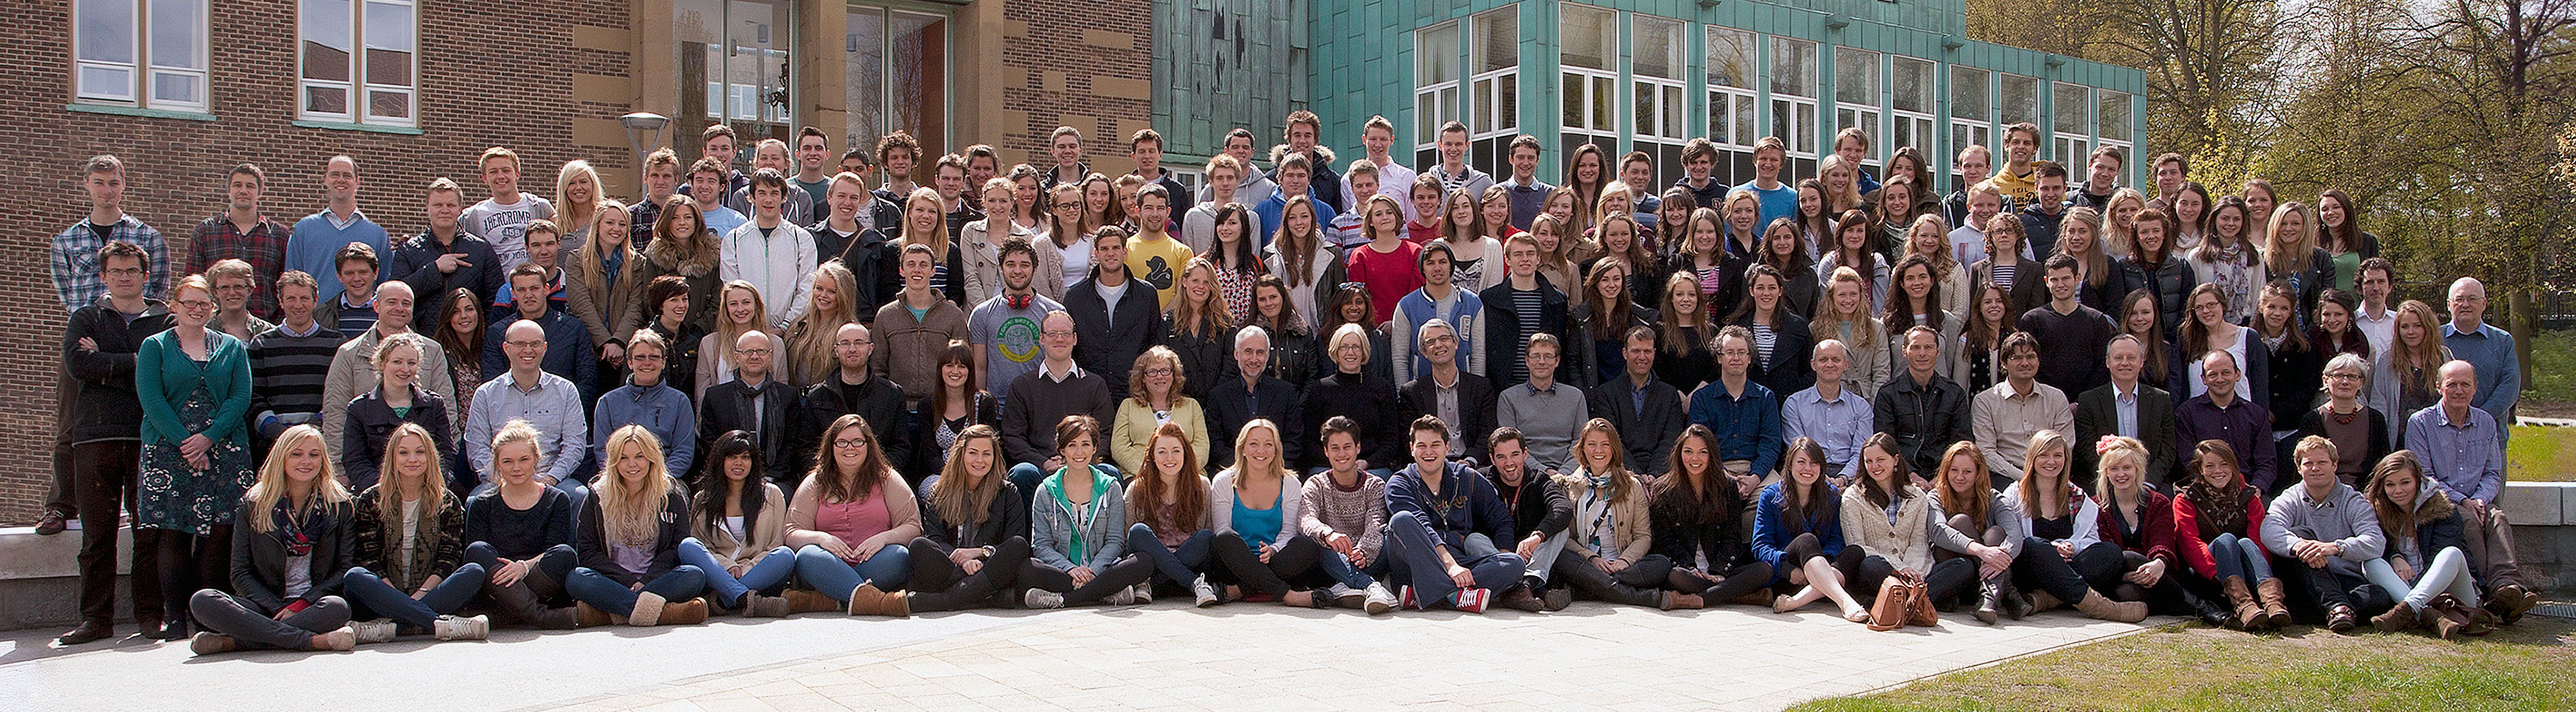 Geography Department Undergraduate Group photo from 2012